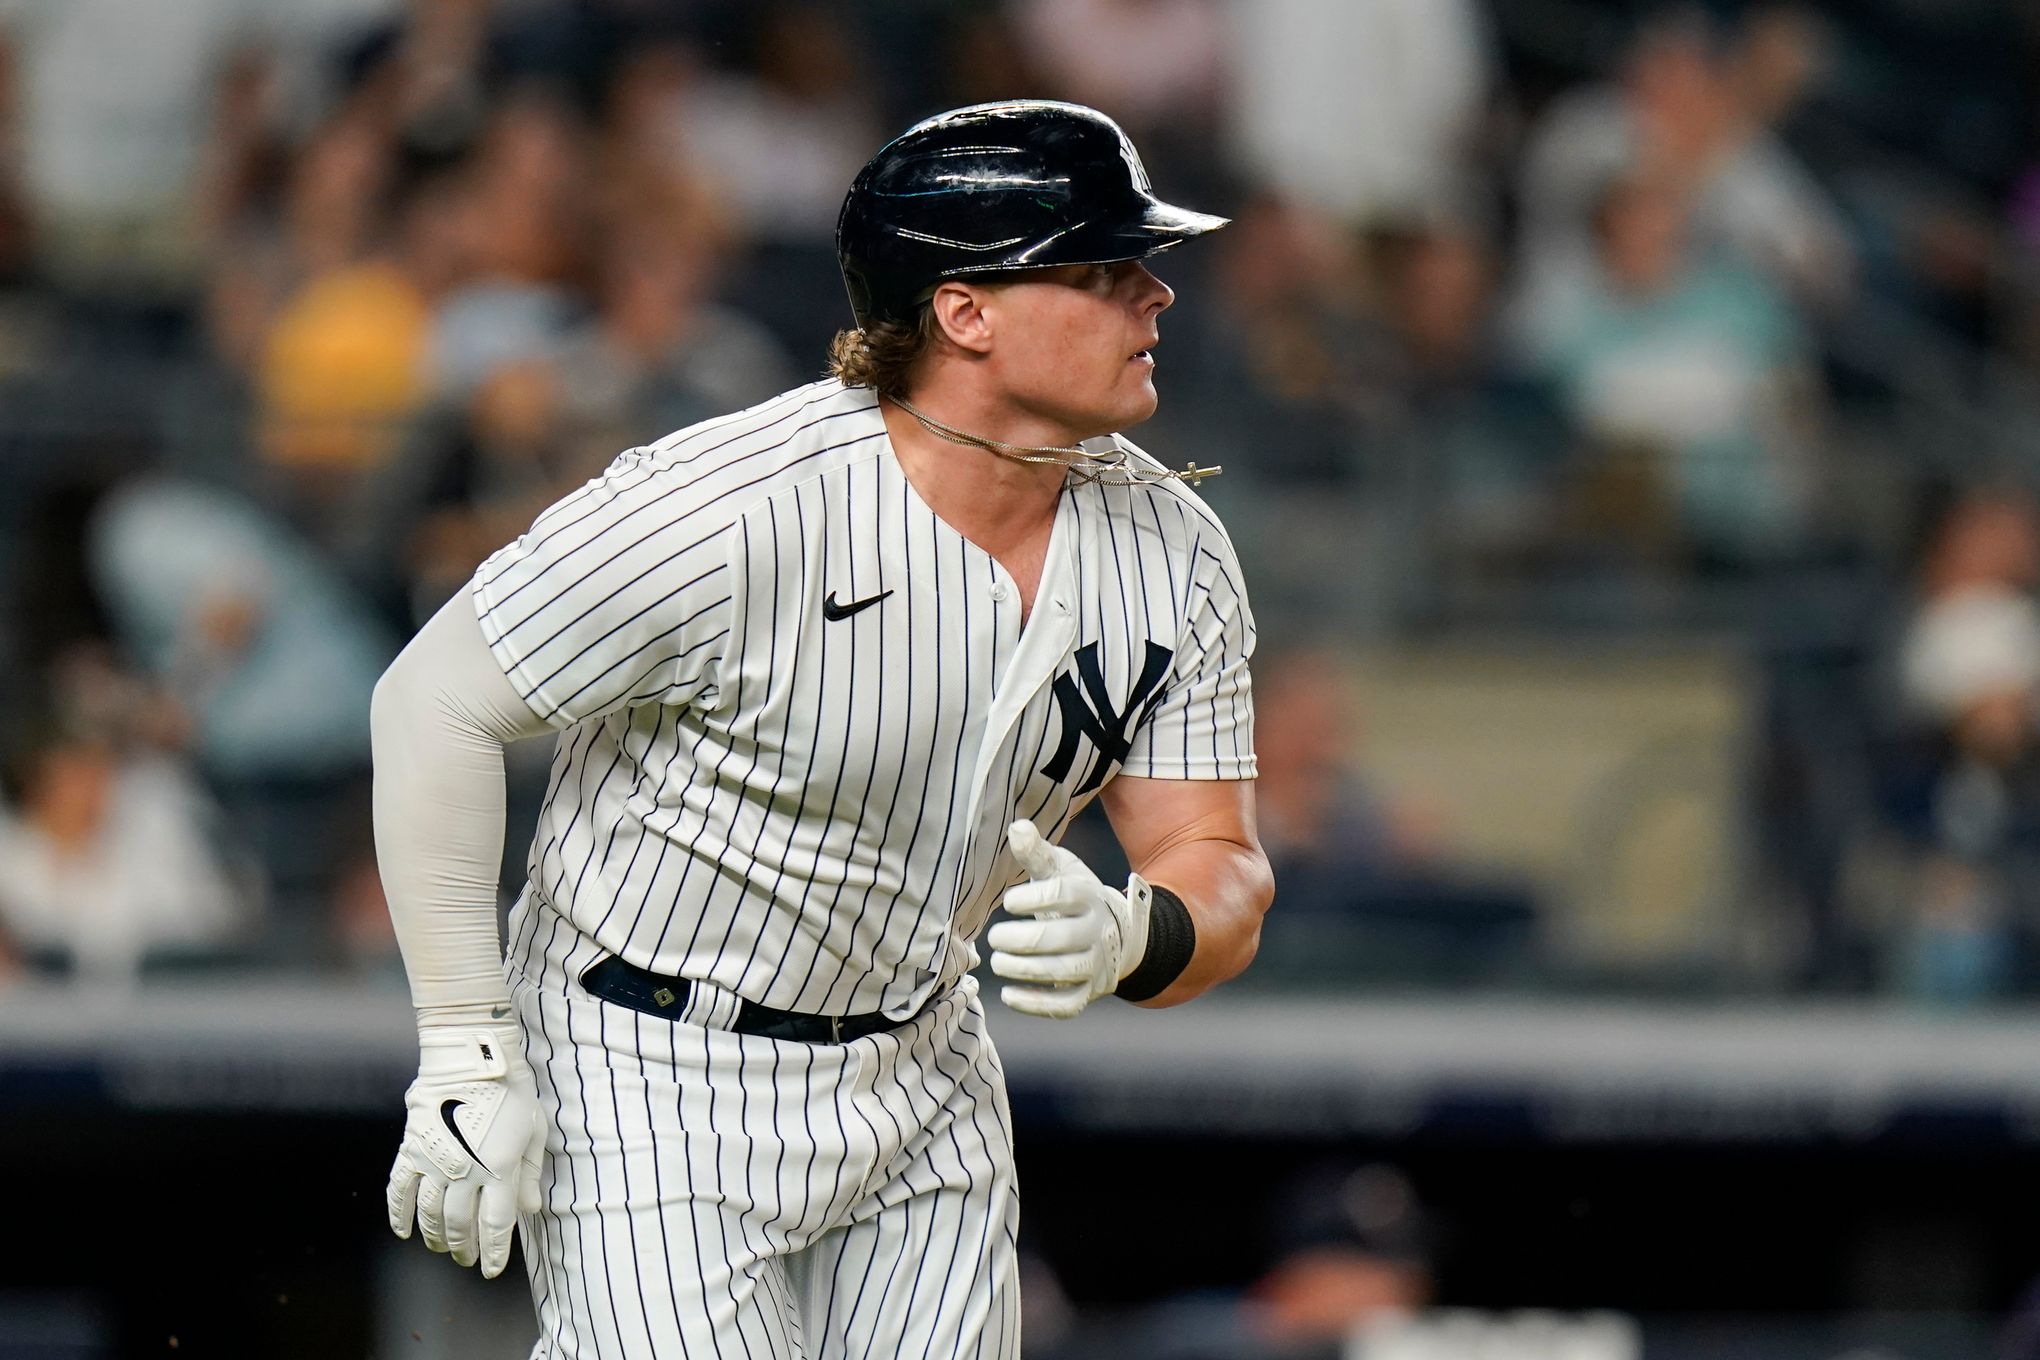 Watch: Luke Voit's frank comments for Domingo German after